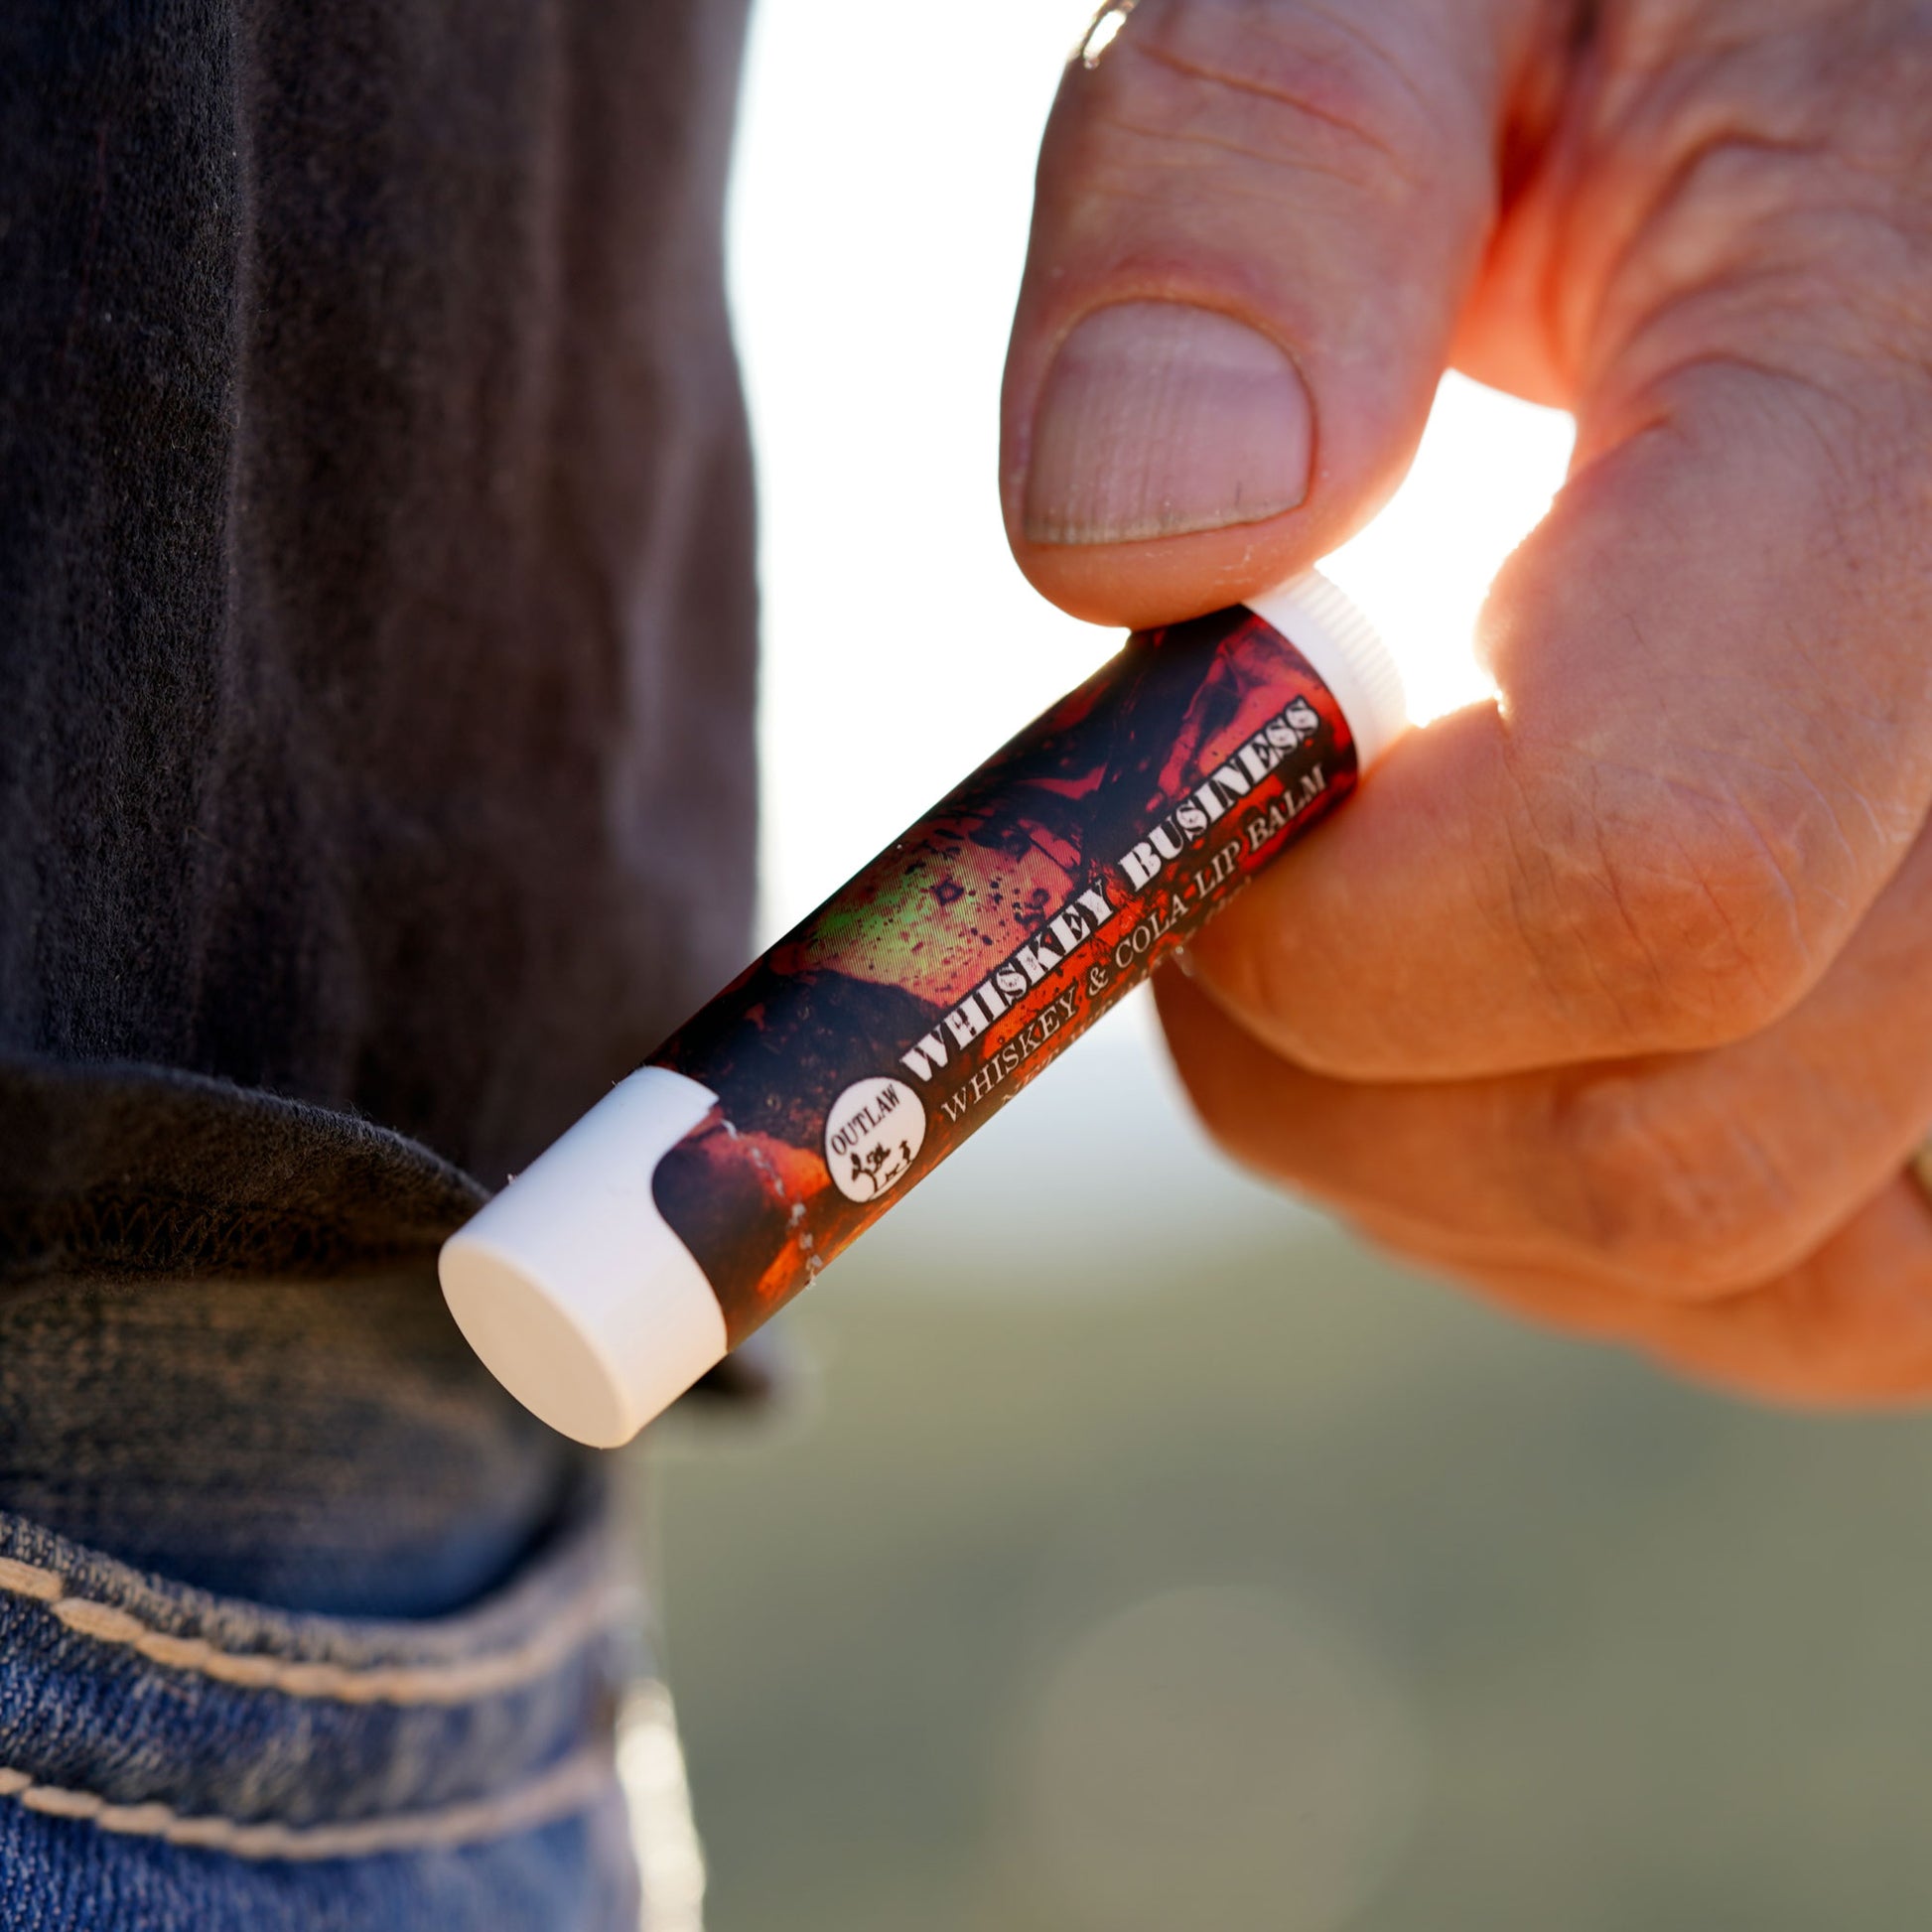 Outlaw whiskey business lip balm tastes like whiskey and cola